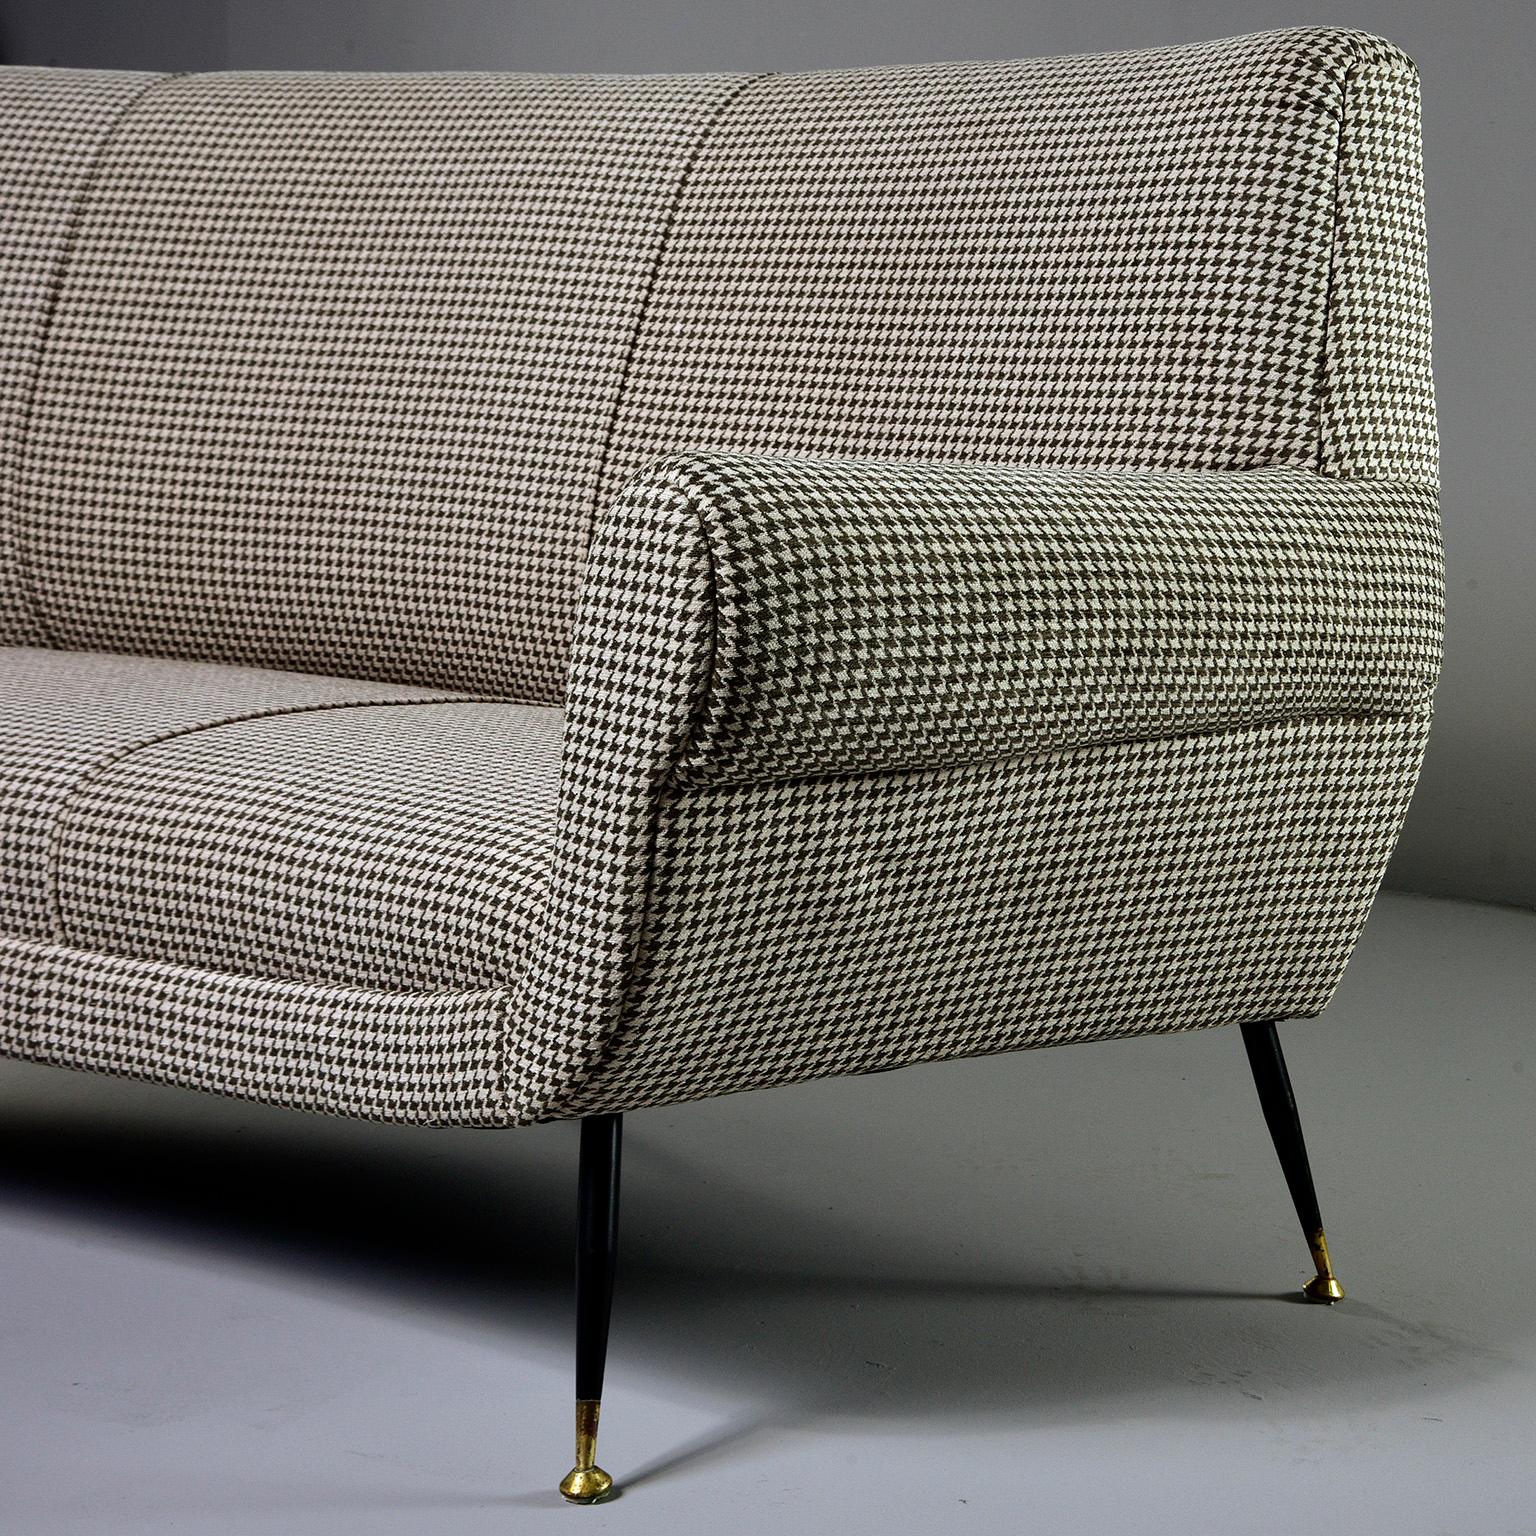 Sofa / settee designed by Gigi Radice for Italian maker Minotti, circa late 1950s. This iconic piece features curvy, midcentury Italian lines, narrow metal legs with black enamel finish and brass feet and new upholstery. Fabric is a short napped